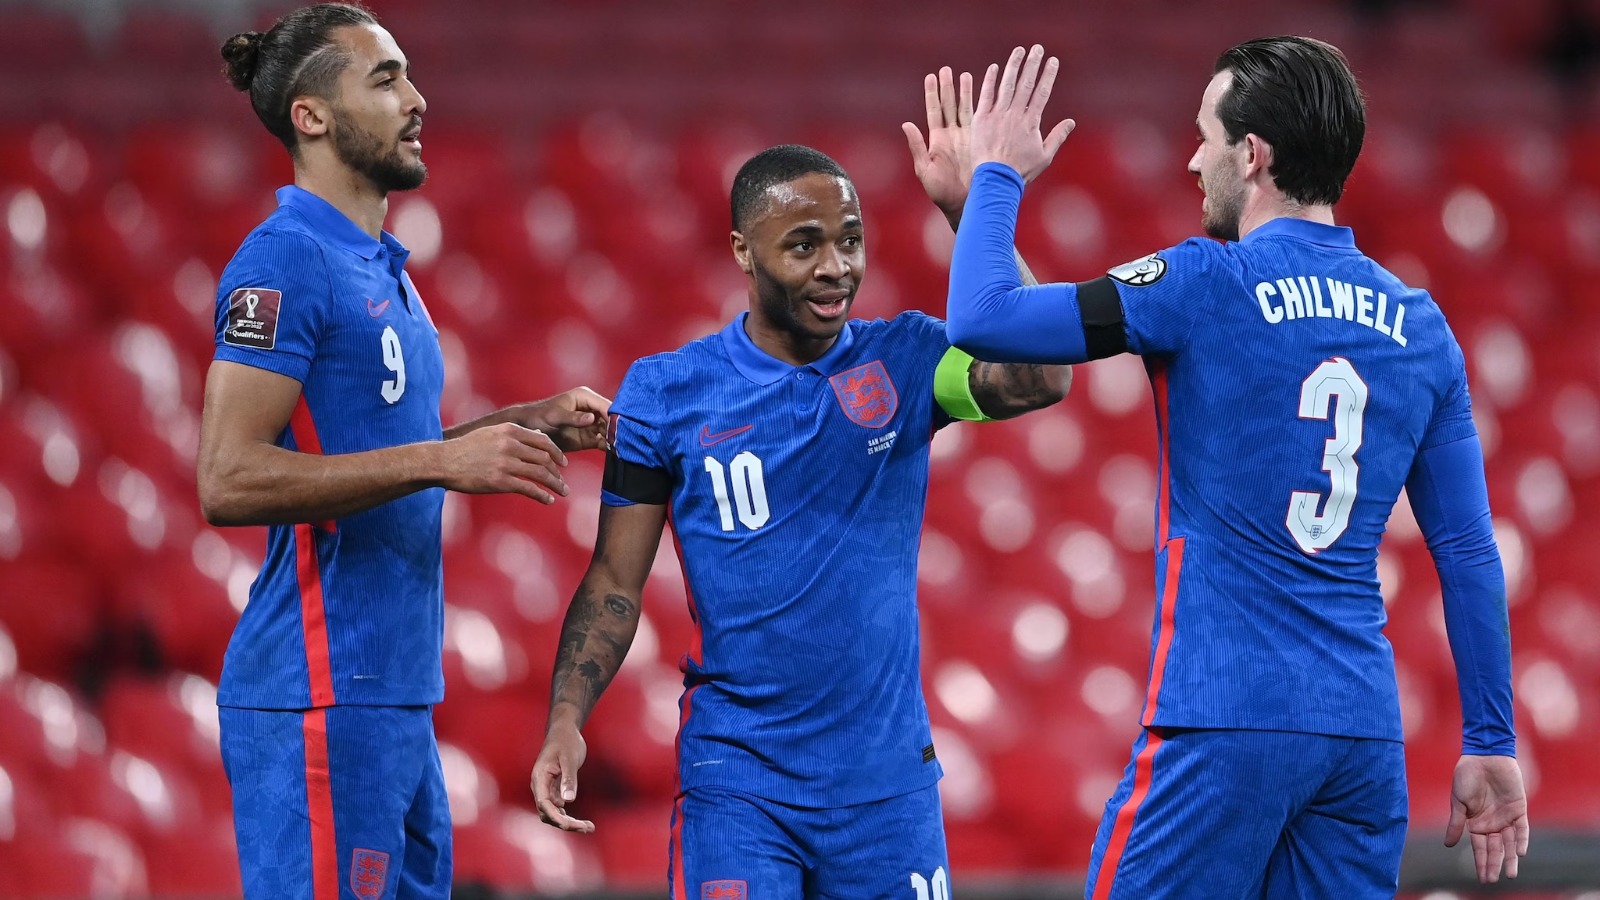 England vs Malta Live Streaming: Three Lions will be in action for the final week of Euro 2024 qualifiers with a home game against Malta.